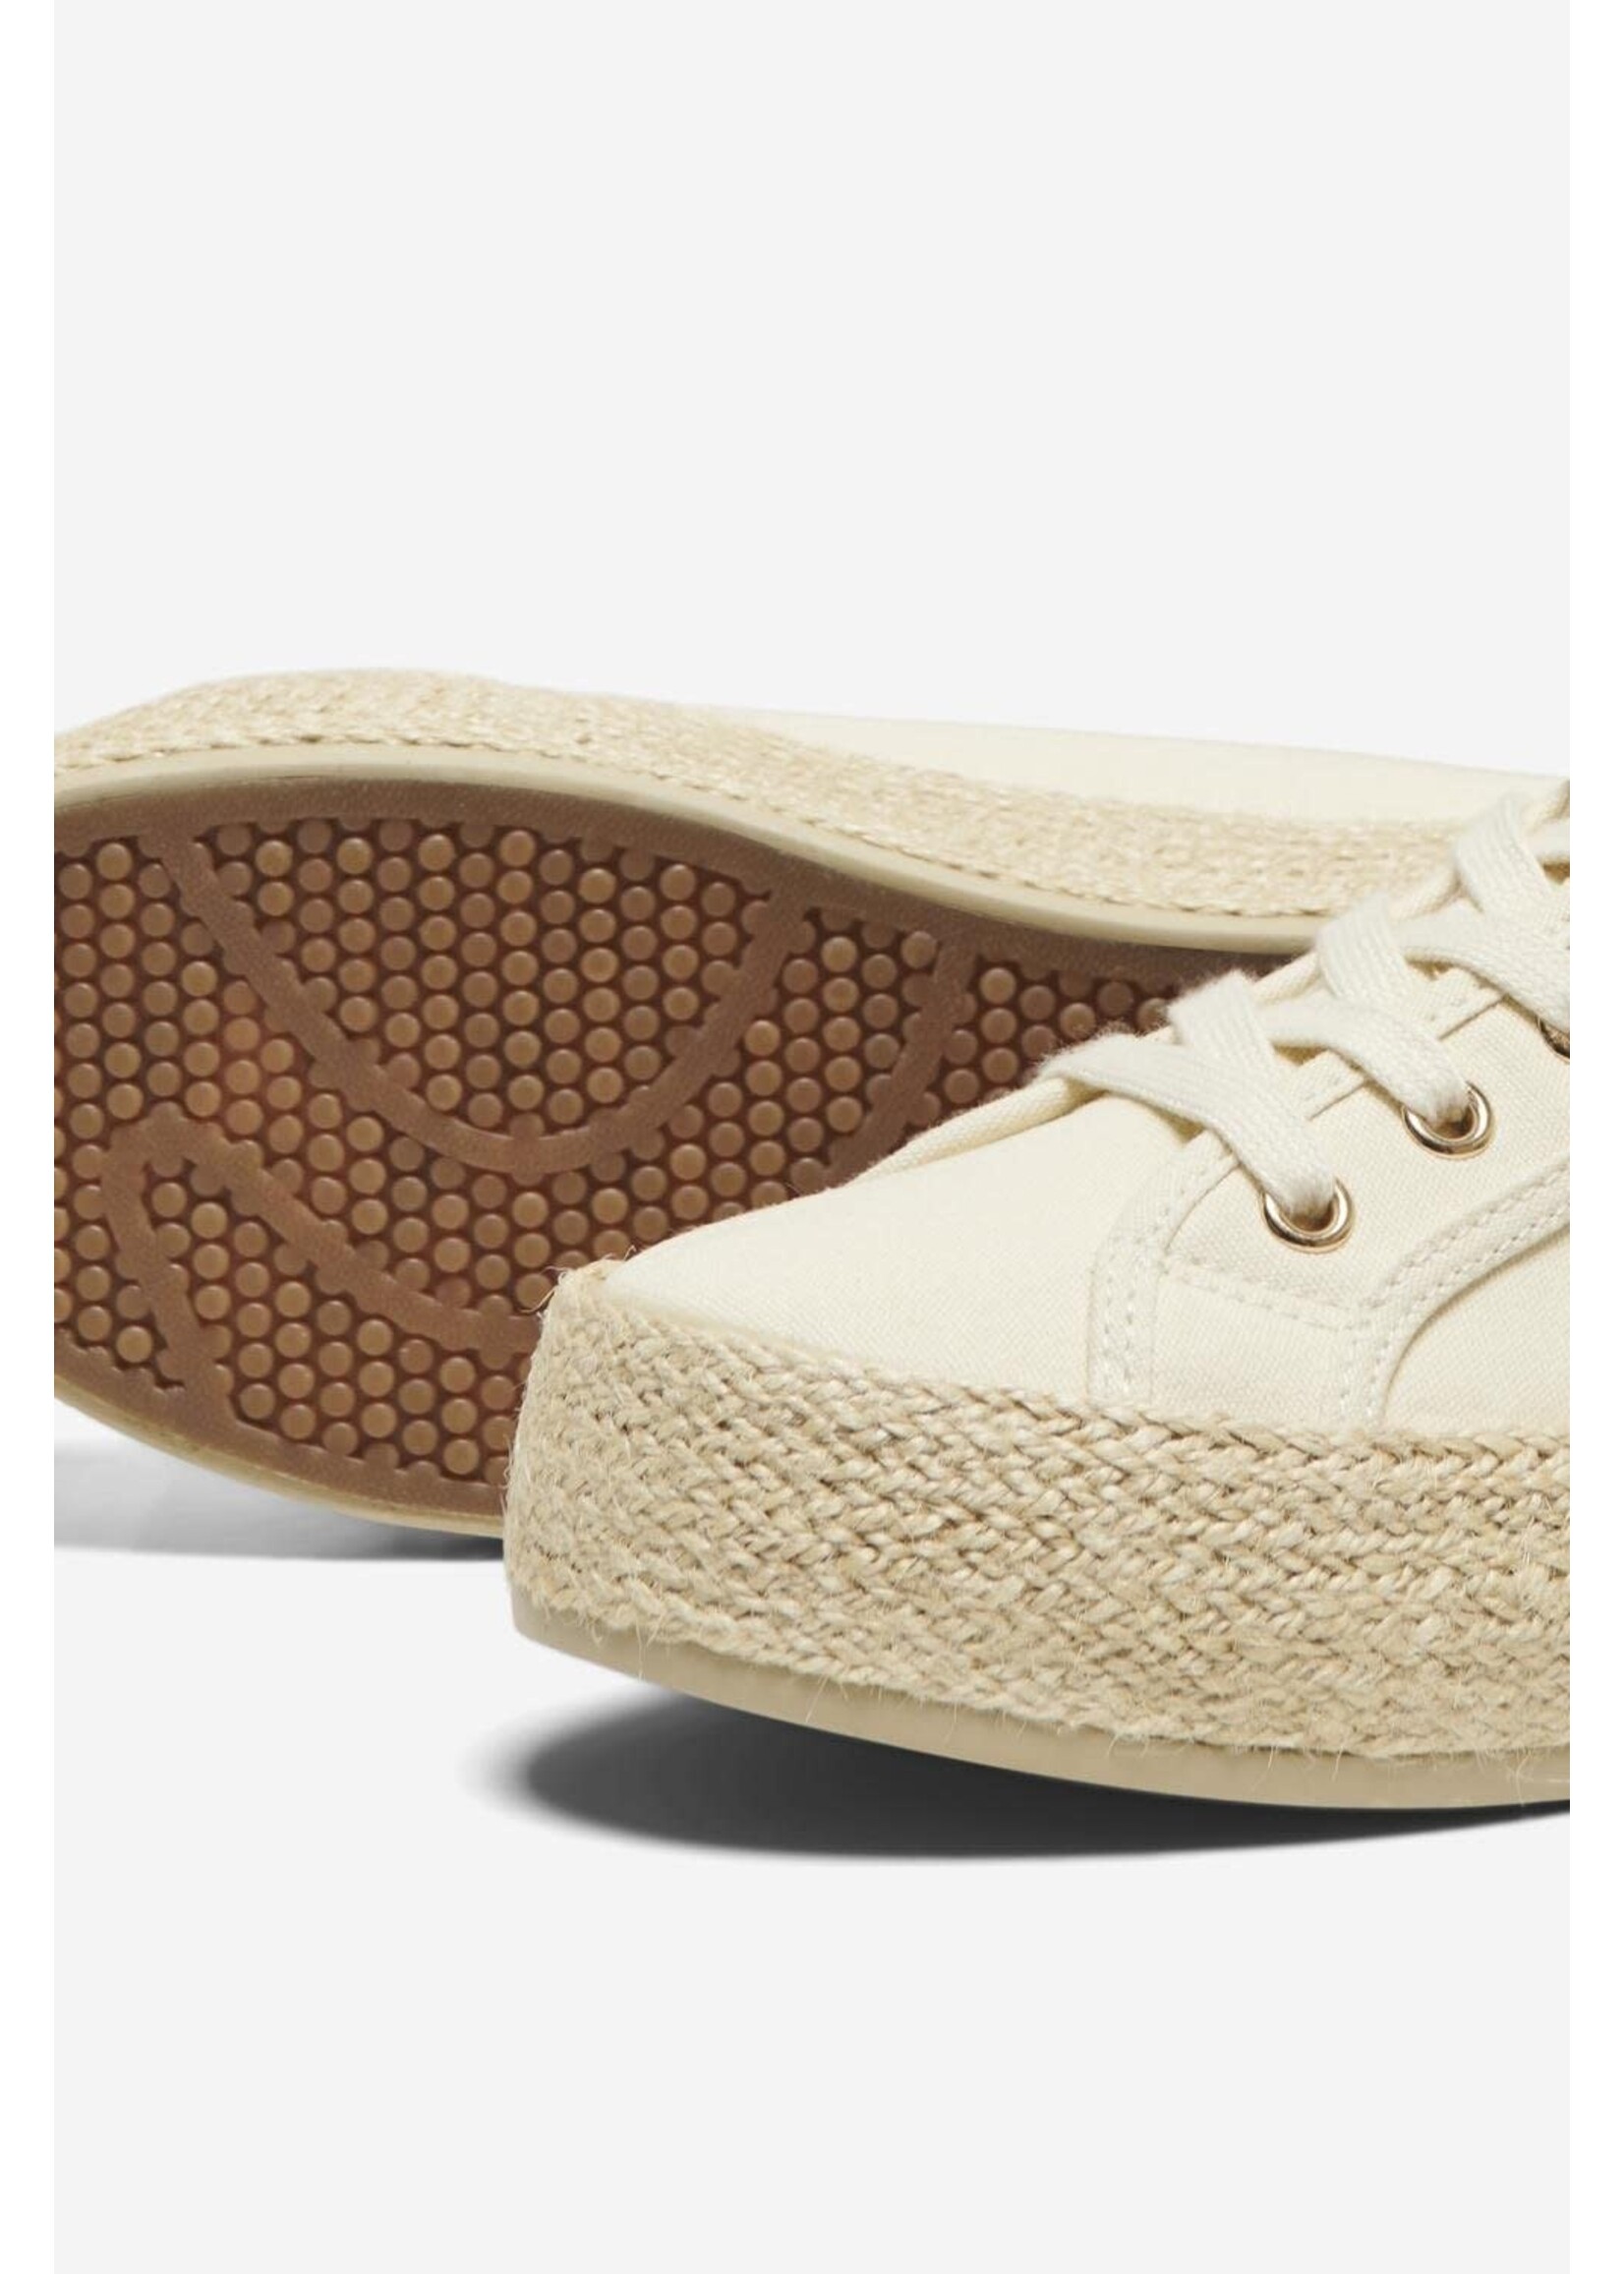 ONLY IDA-1 LACE UP ESPADRILLE SNEAKER creme